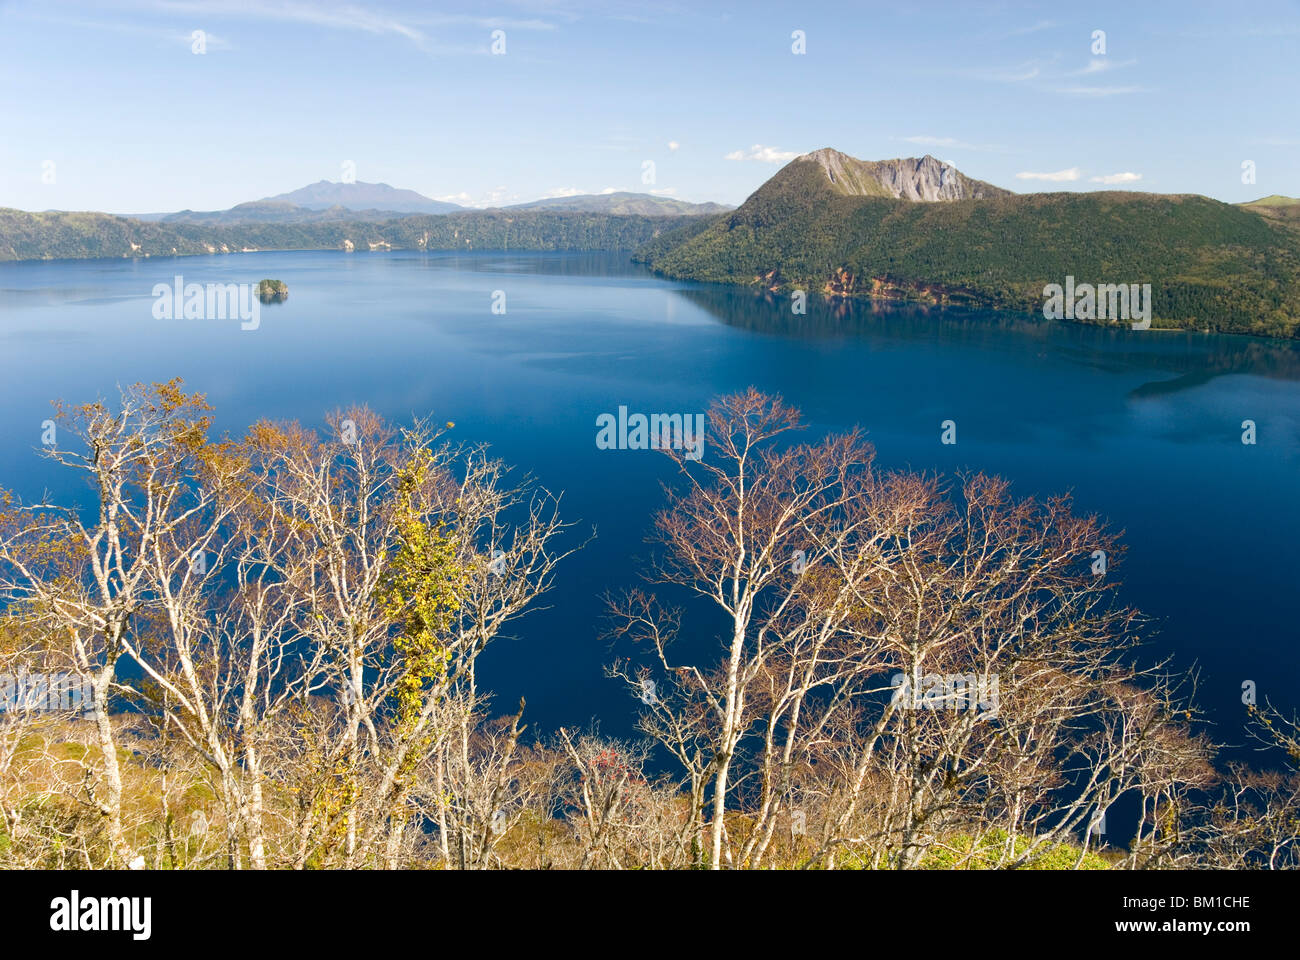 Mashu Lake lying in a volcanic caldera with a later volcanic cone on the right, Akan National Park, Hokkaido, Japan Stock Photo